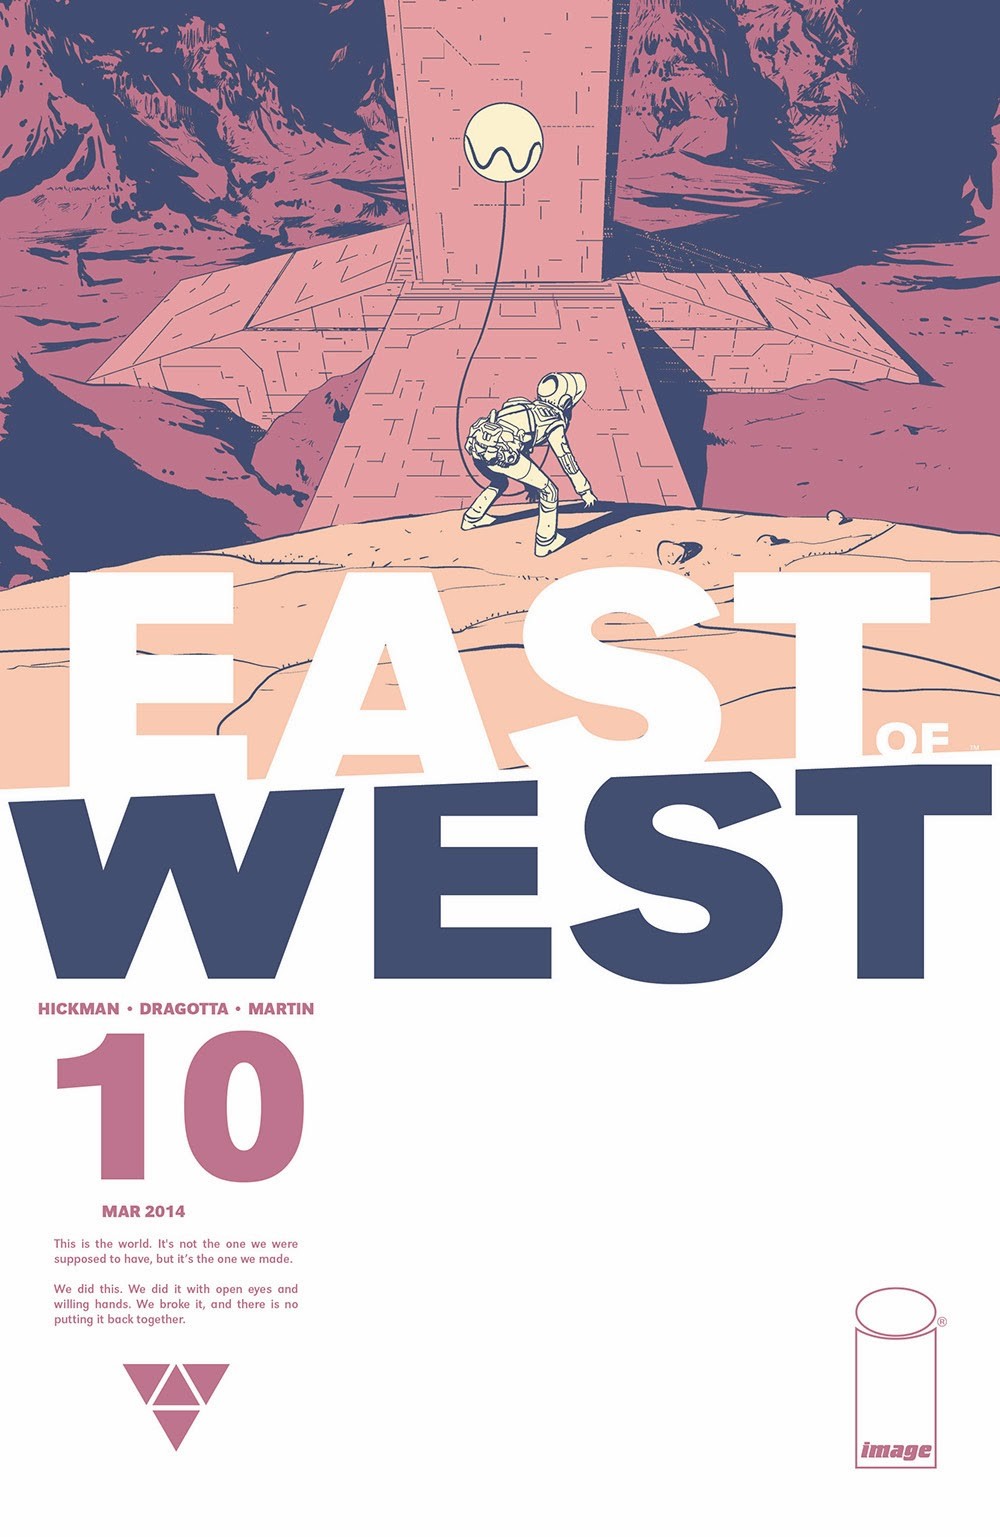 East of West Vol. 1 #10